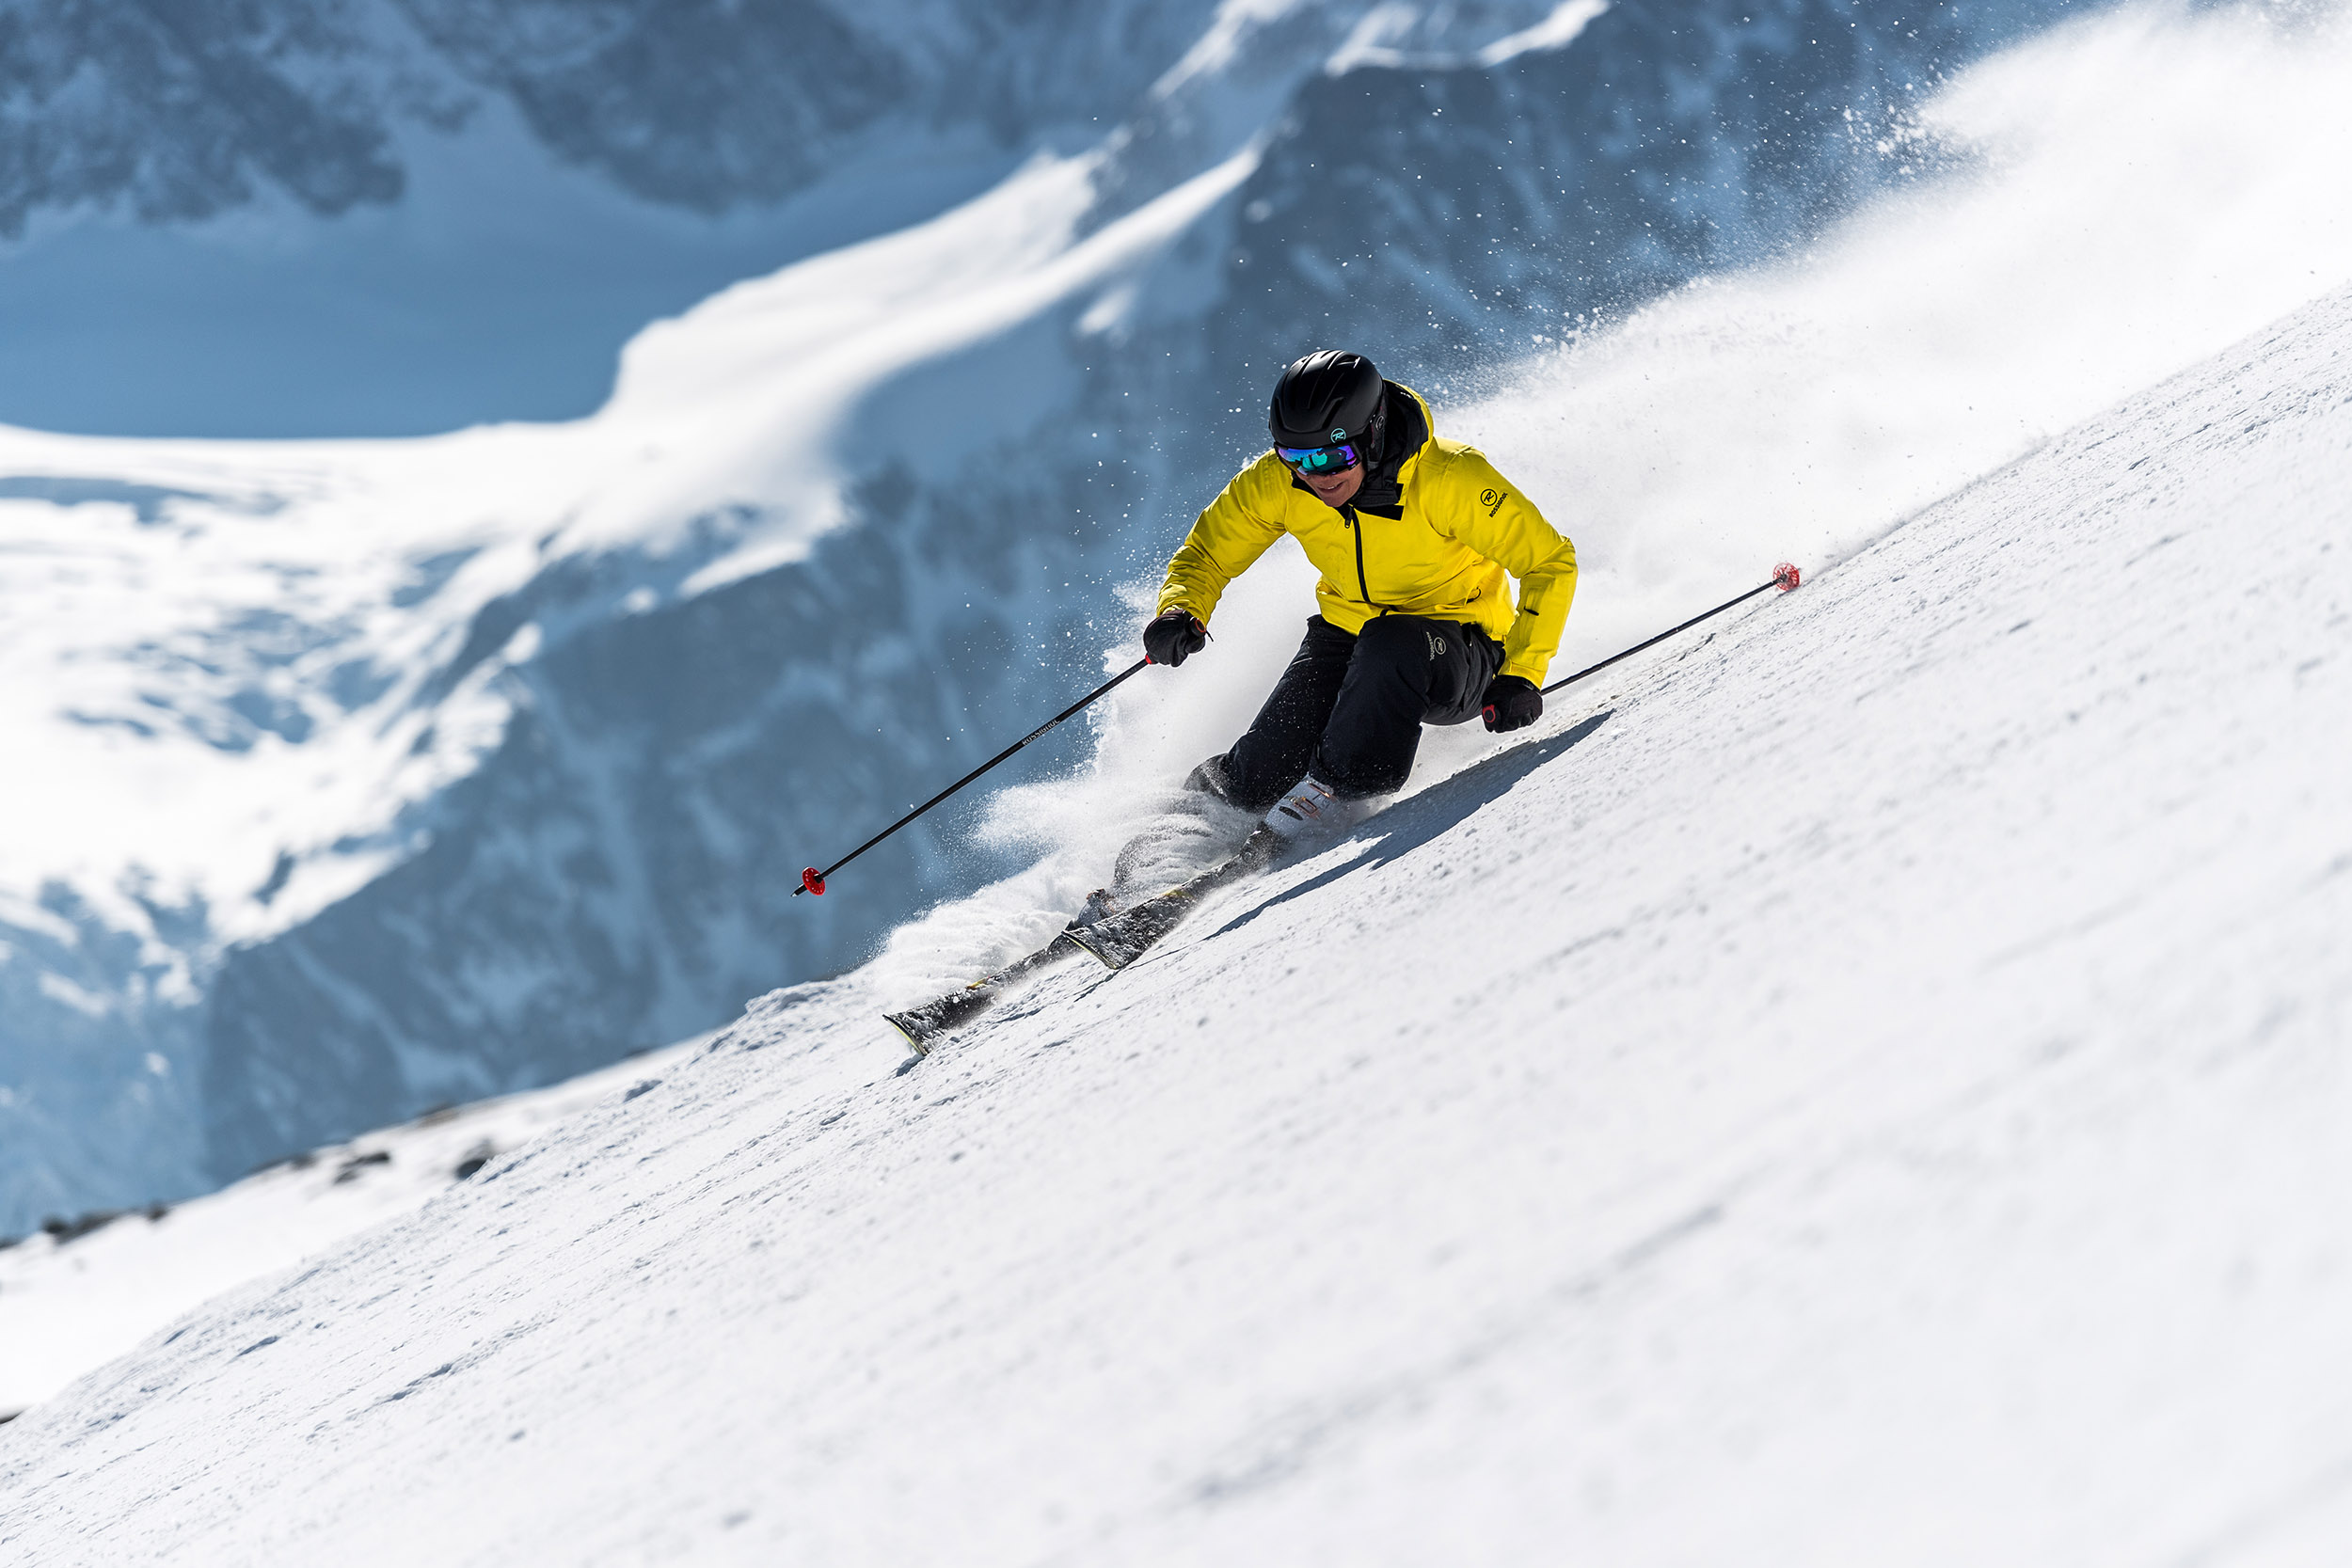 Skier skiing down the slope